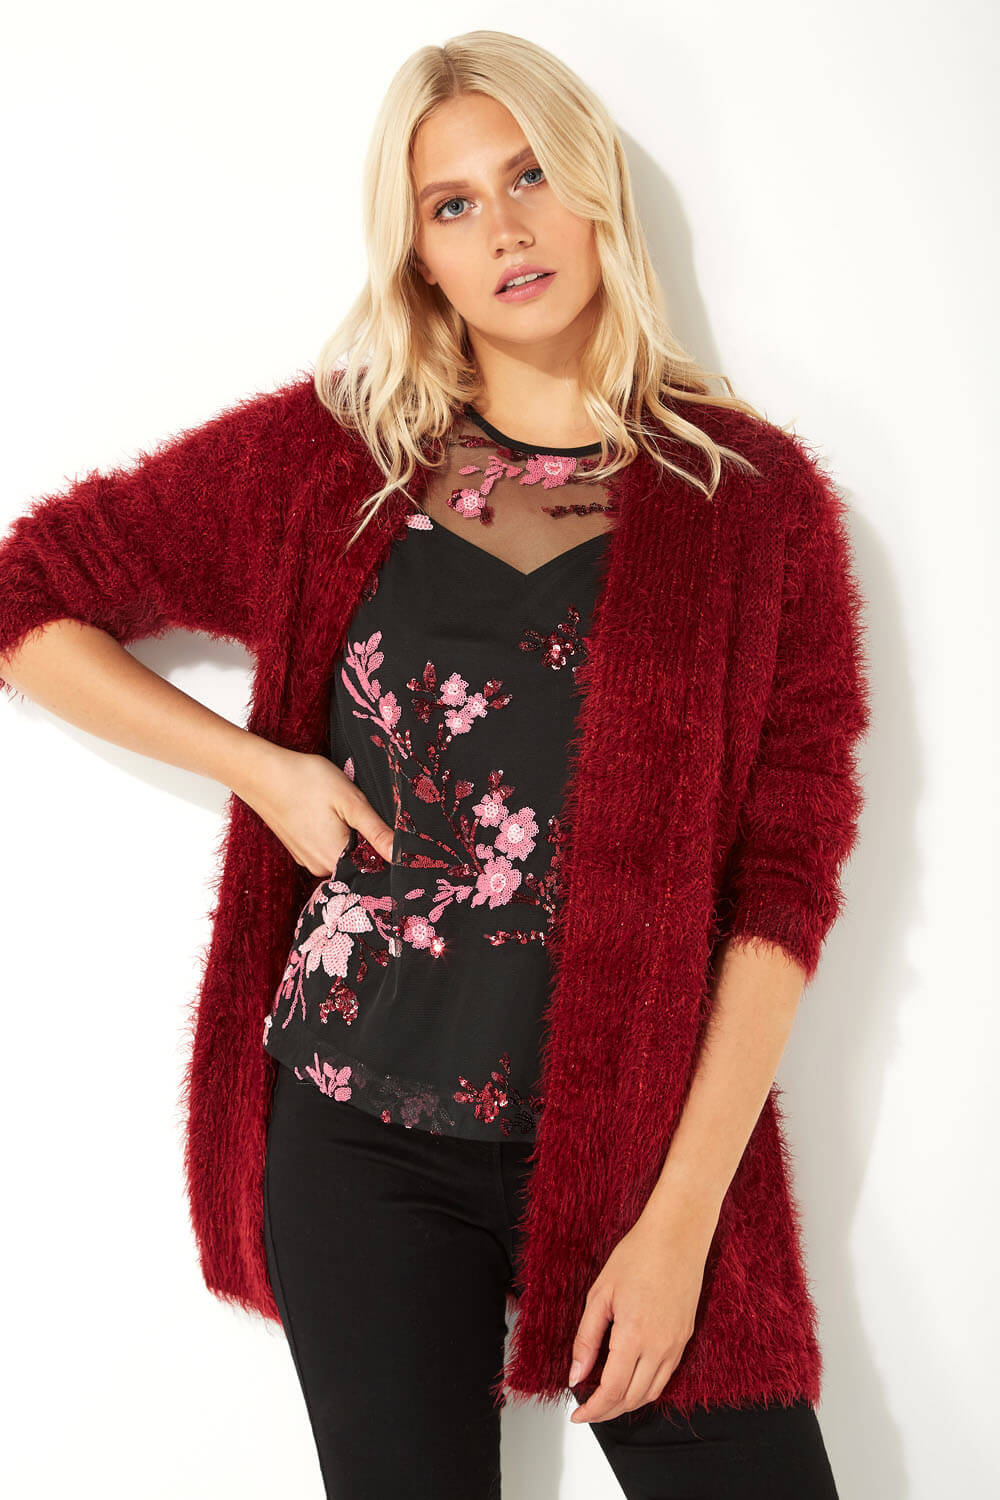 Bordeaux Fluffy Sequin Cardigan, Image 4 of 5